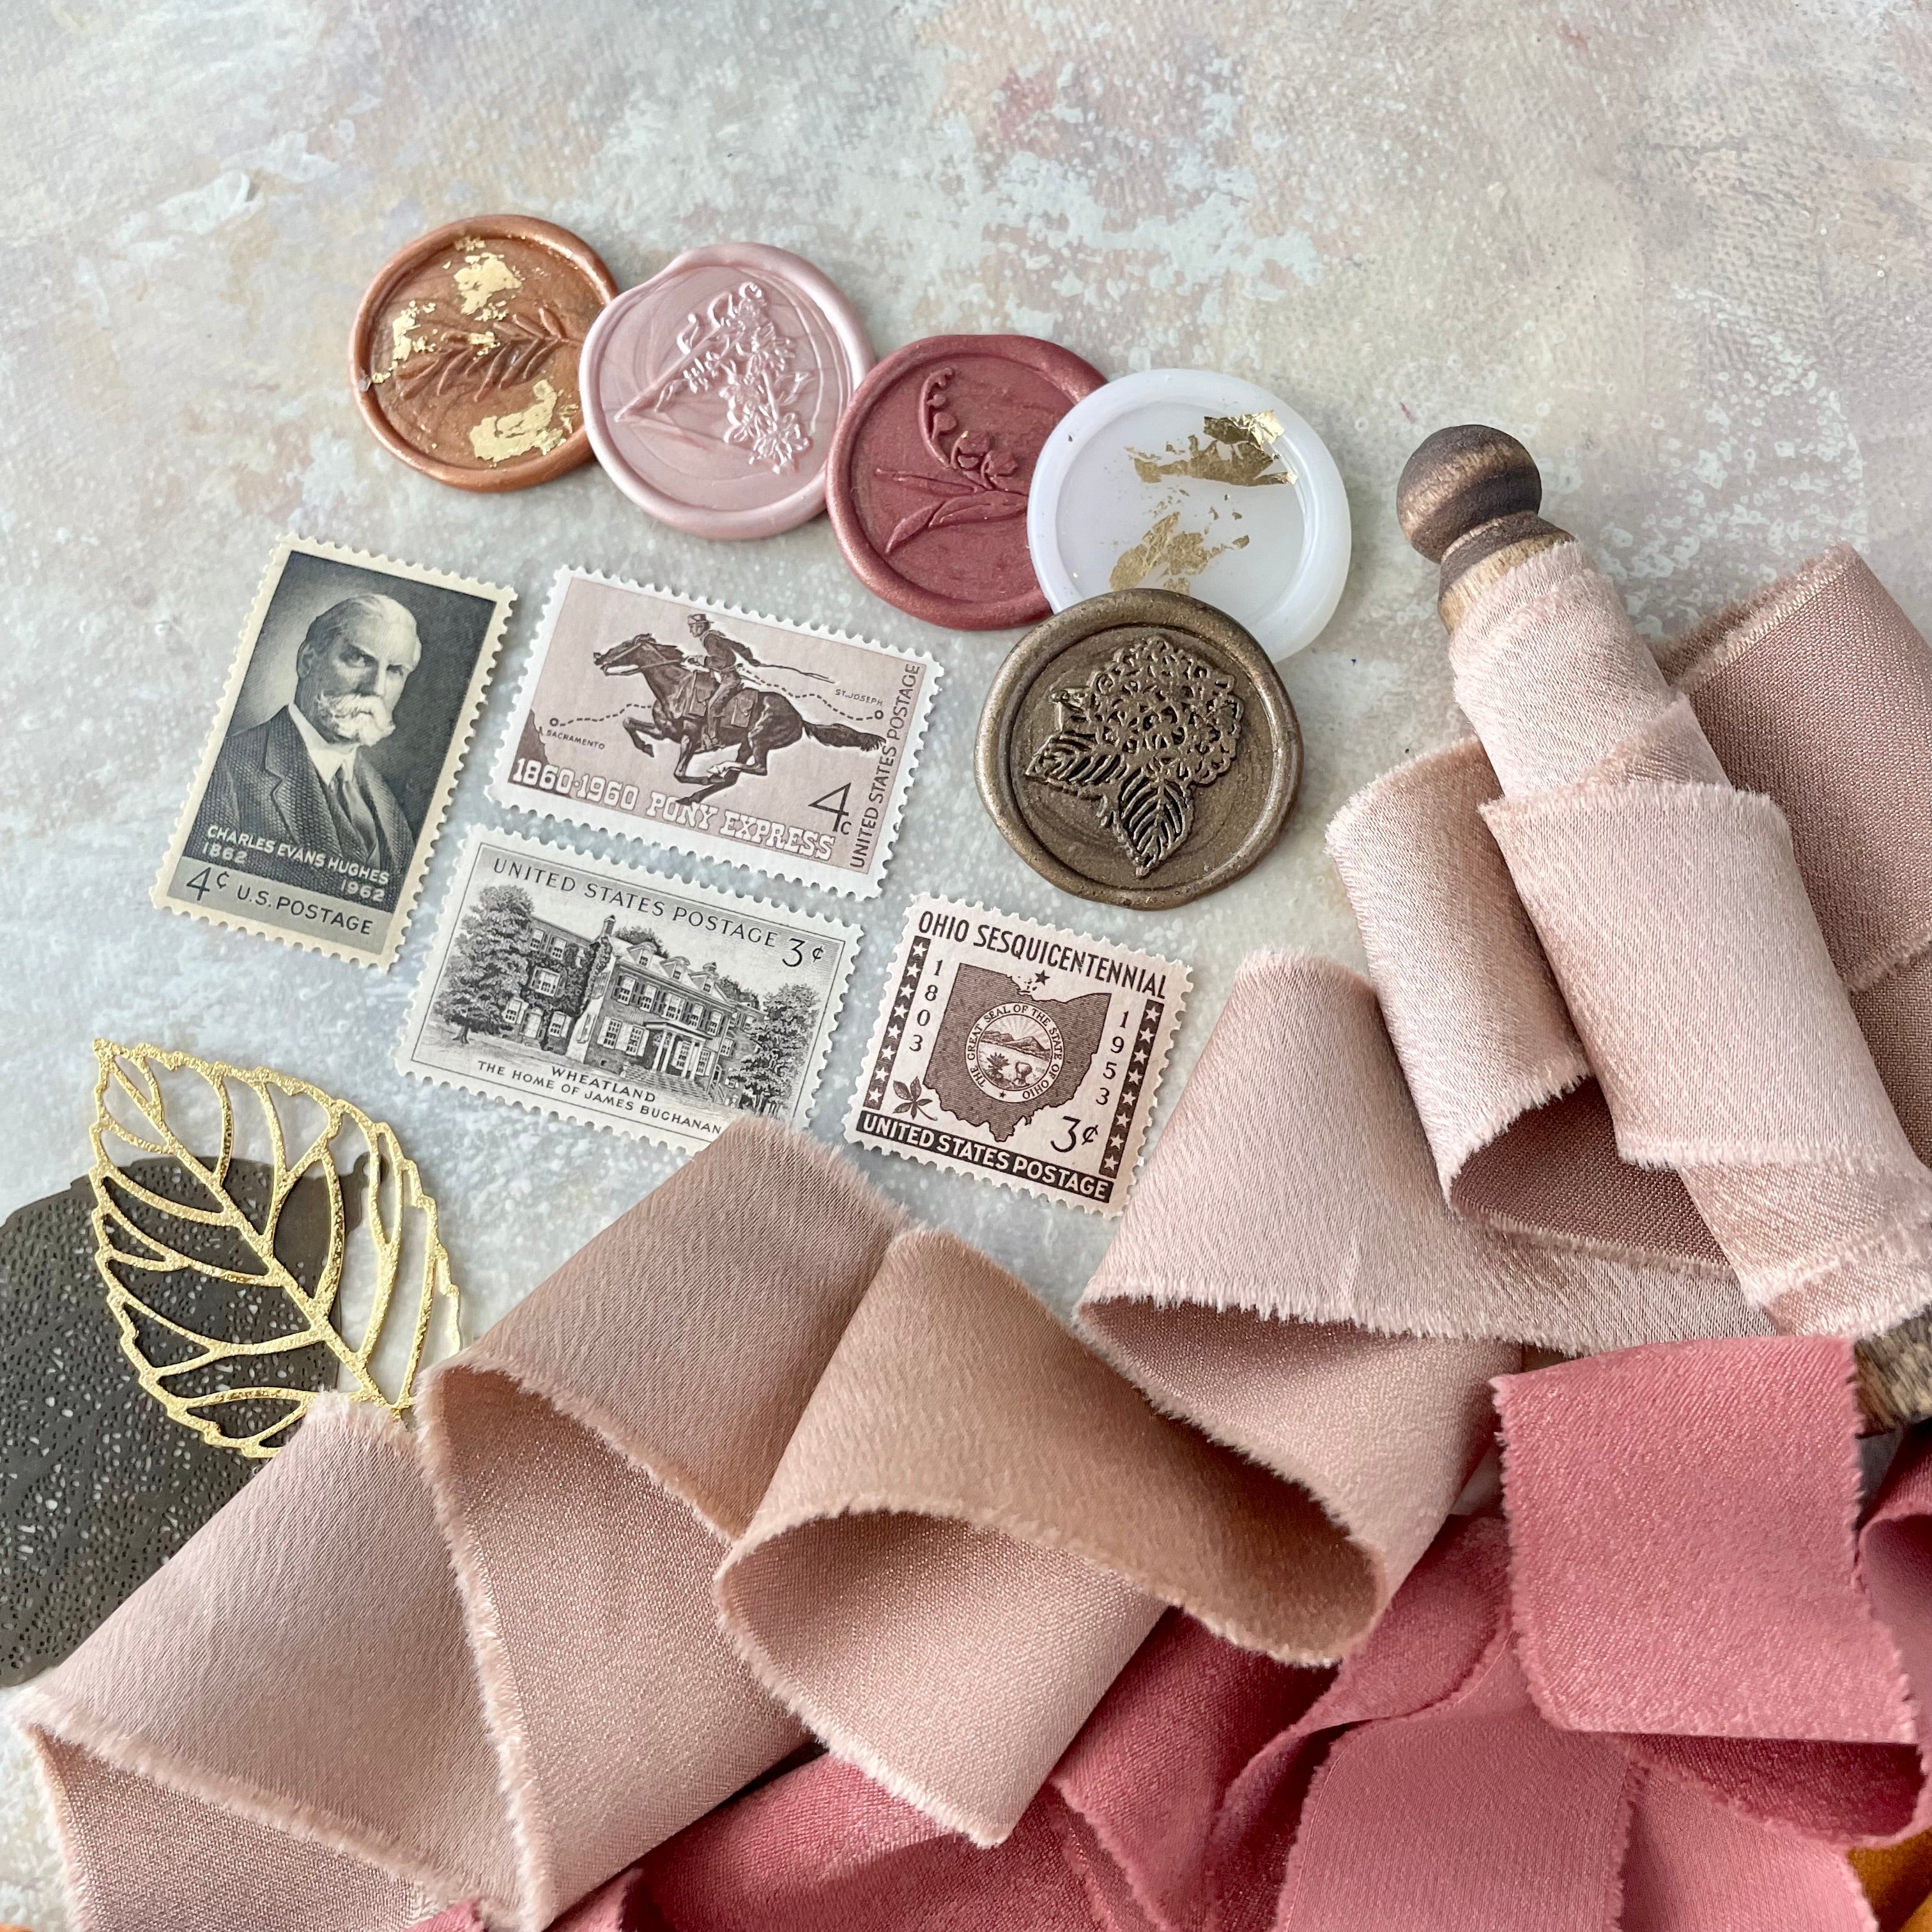 5 wax seals, 4 vintage postage stamps, and 2 spools of ribbon  - Wedding Flat lay props from Champagne & GRIT